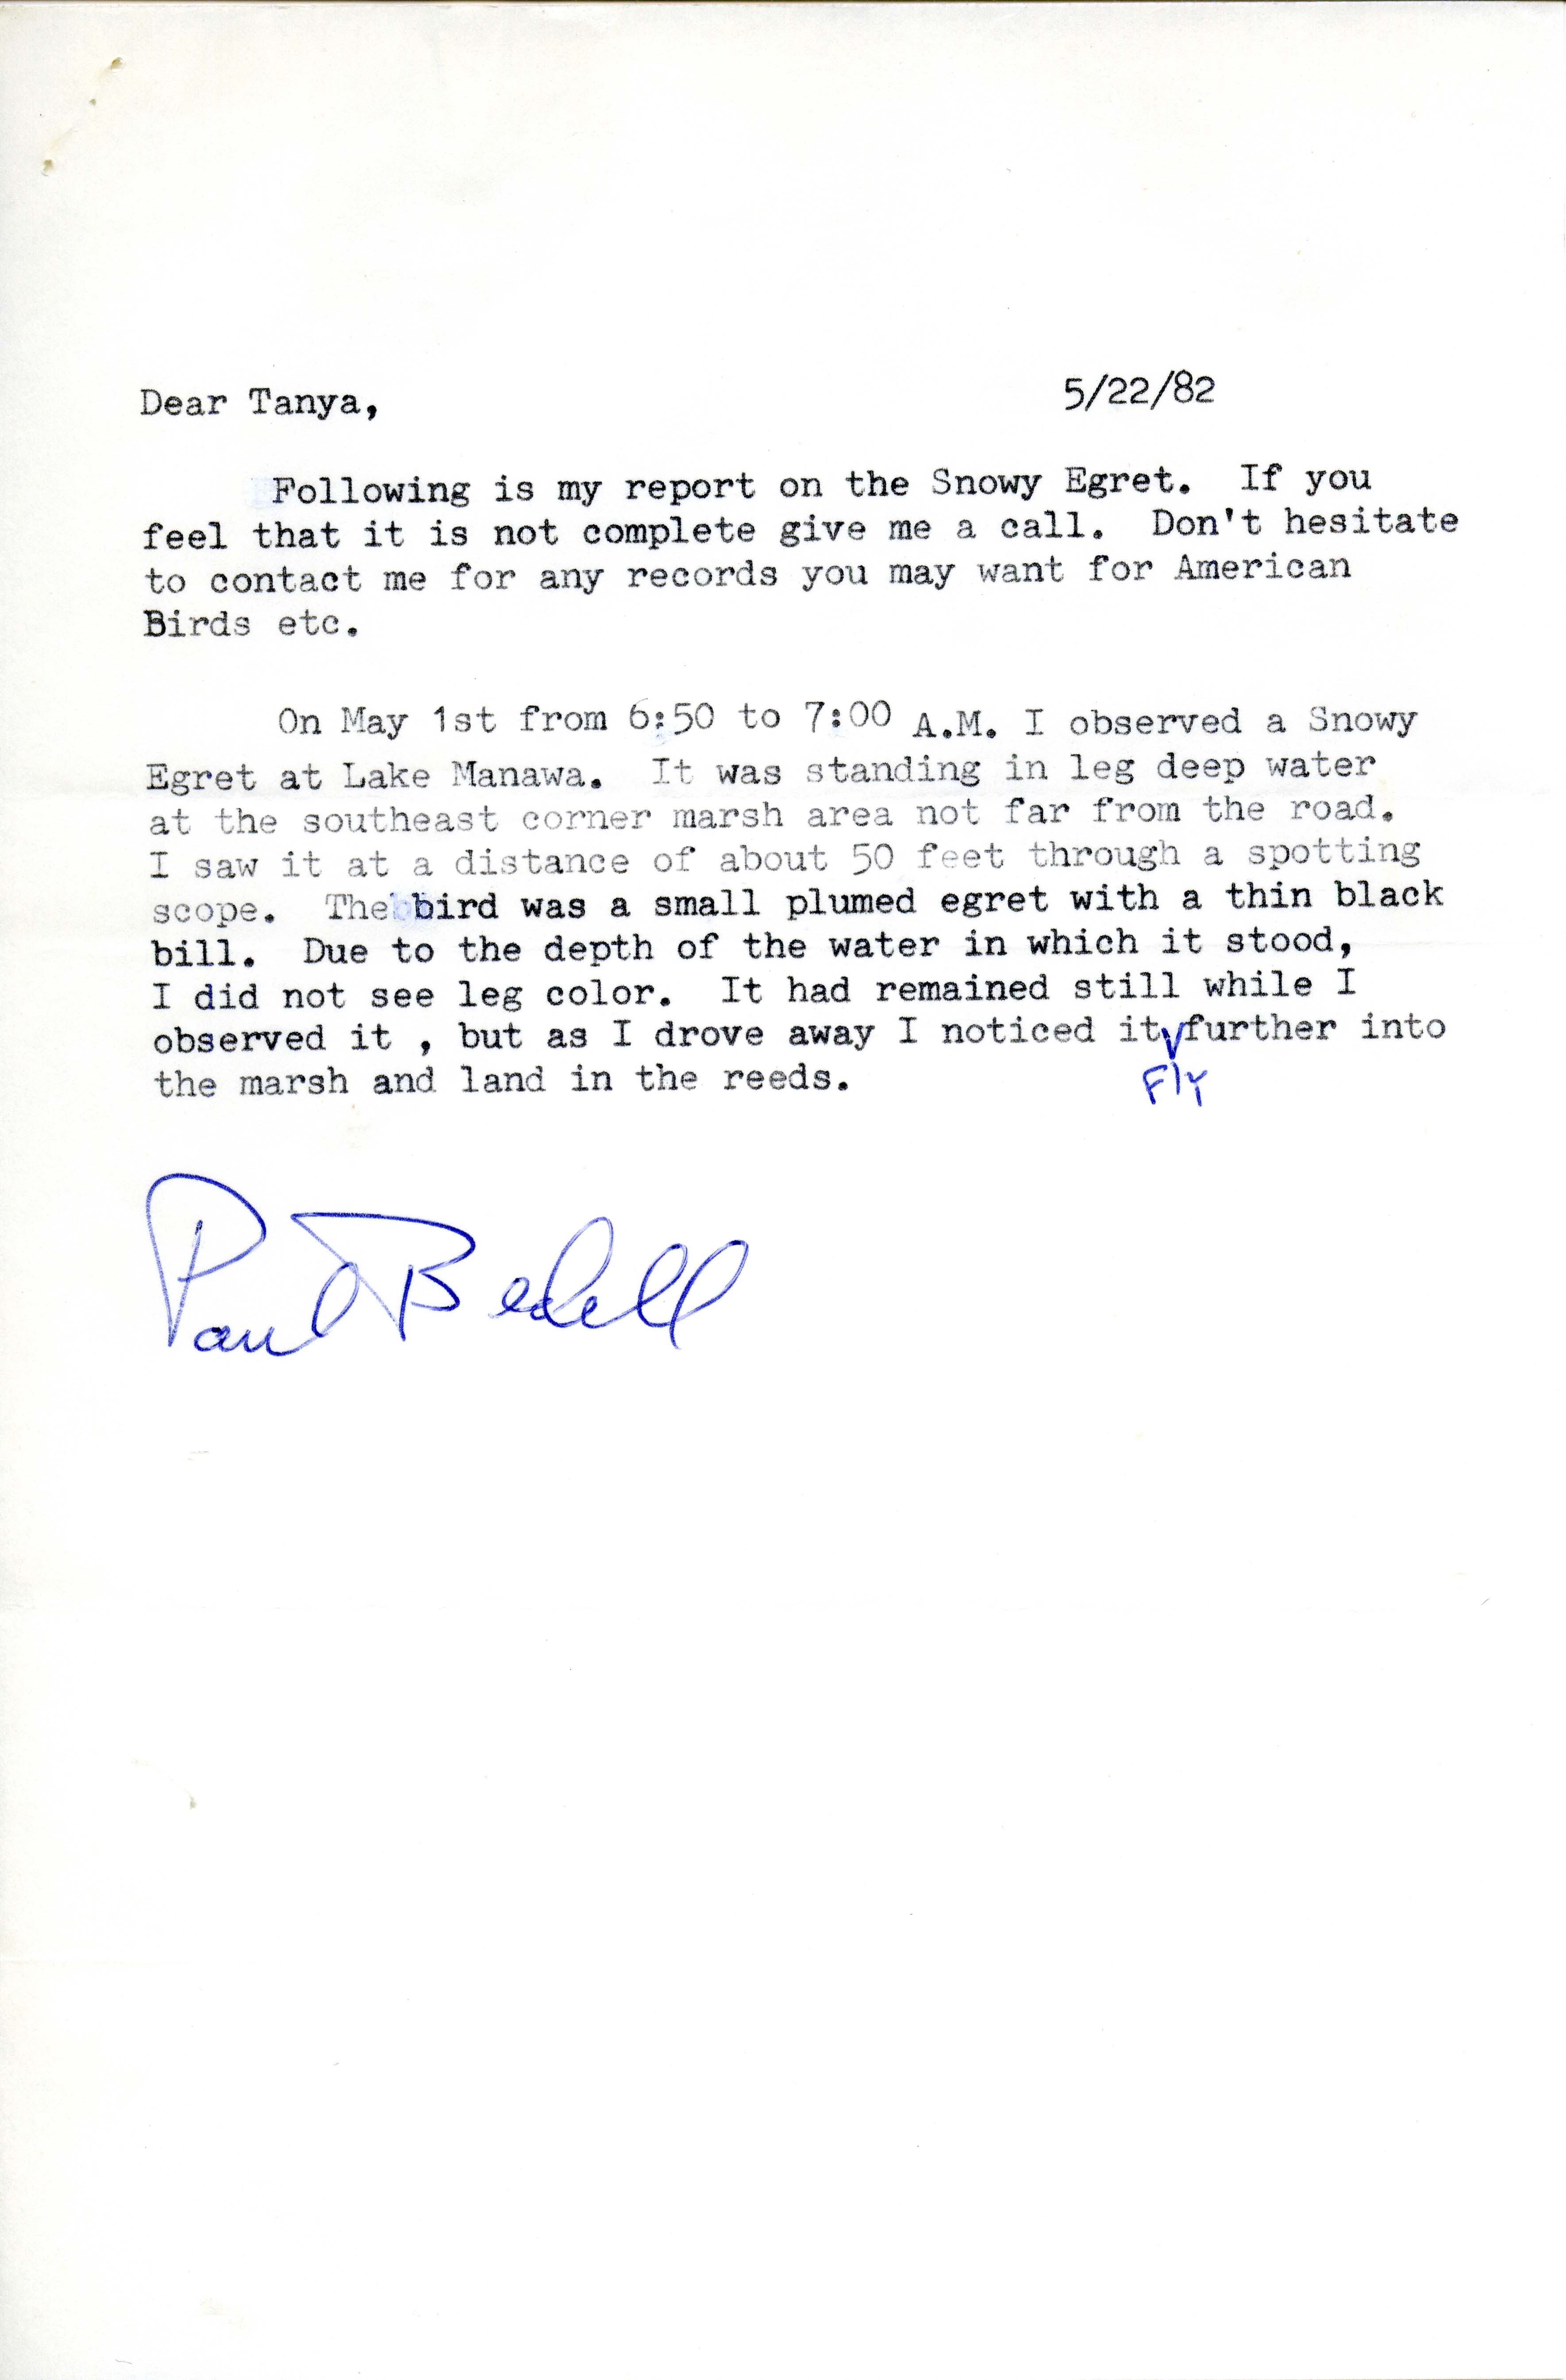 Paul Bedell letter to Tanya Bray regarding field notes, May 22, 1982